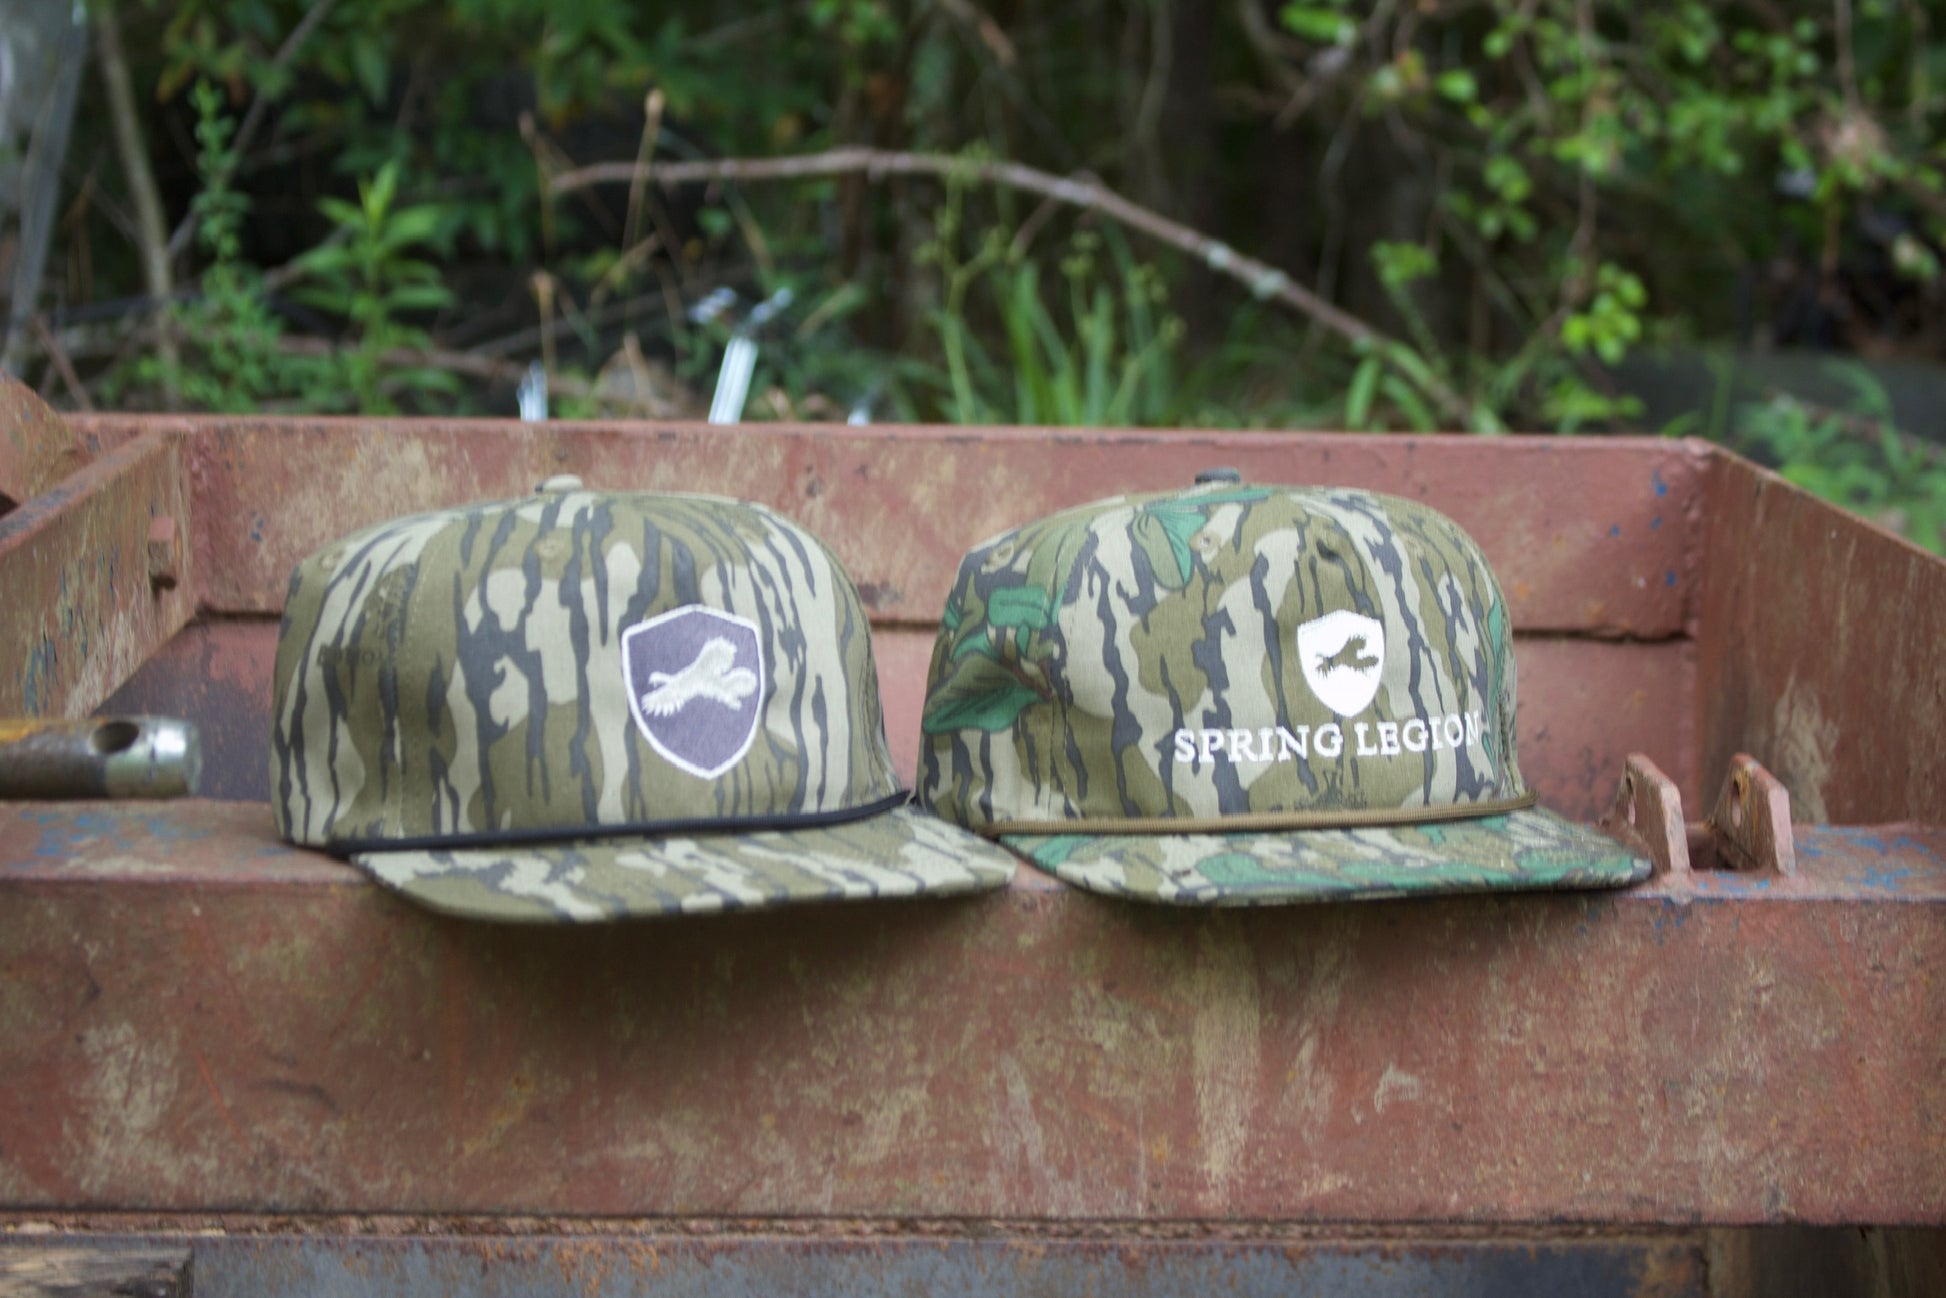 Greenleaf Rope Hat, mossy oak, spring legion, turkey hunting, panola, save the poults, brand, old school, outdoor, nwtf, turkeys for tomorrow, bottomland, lost 